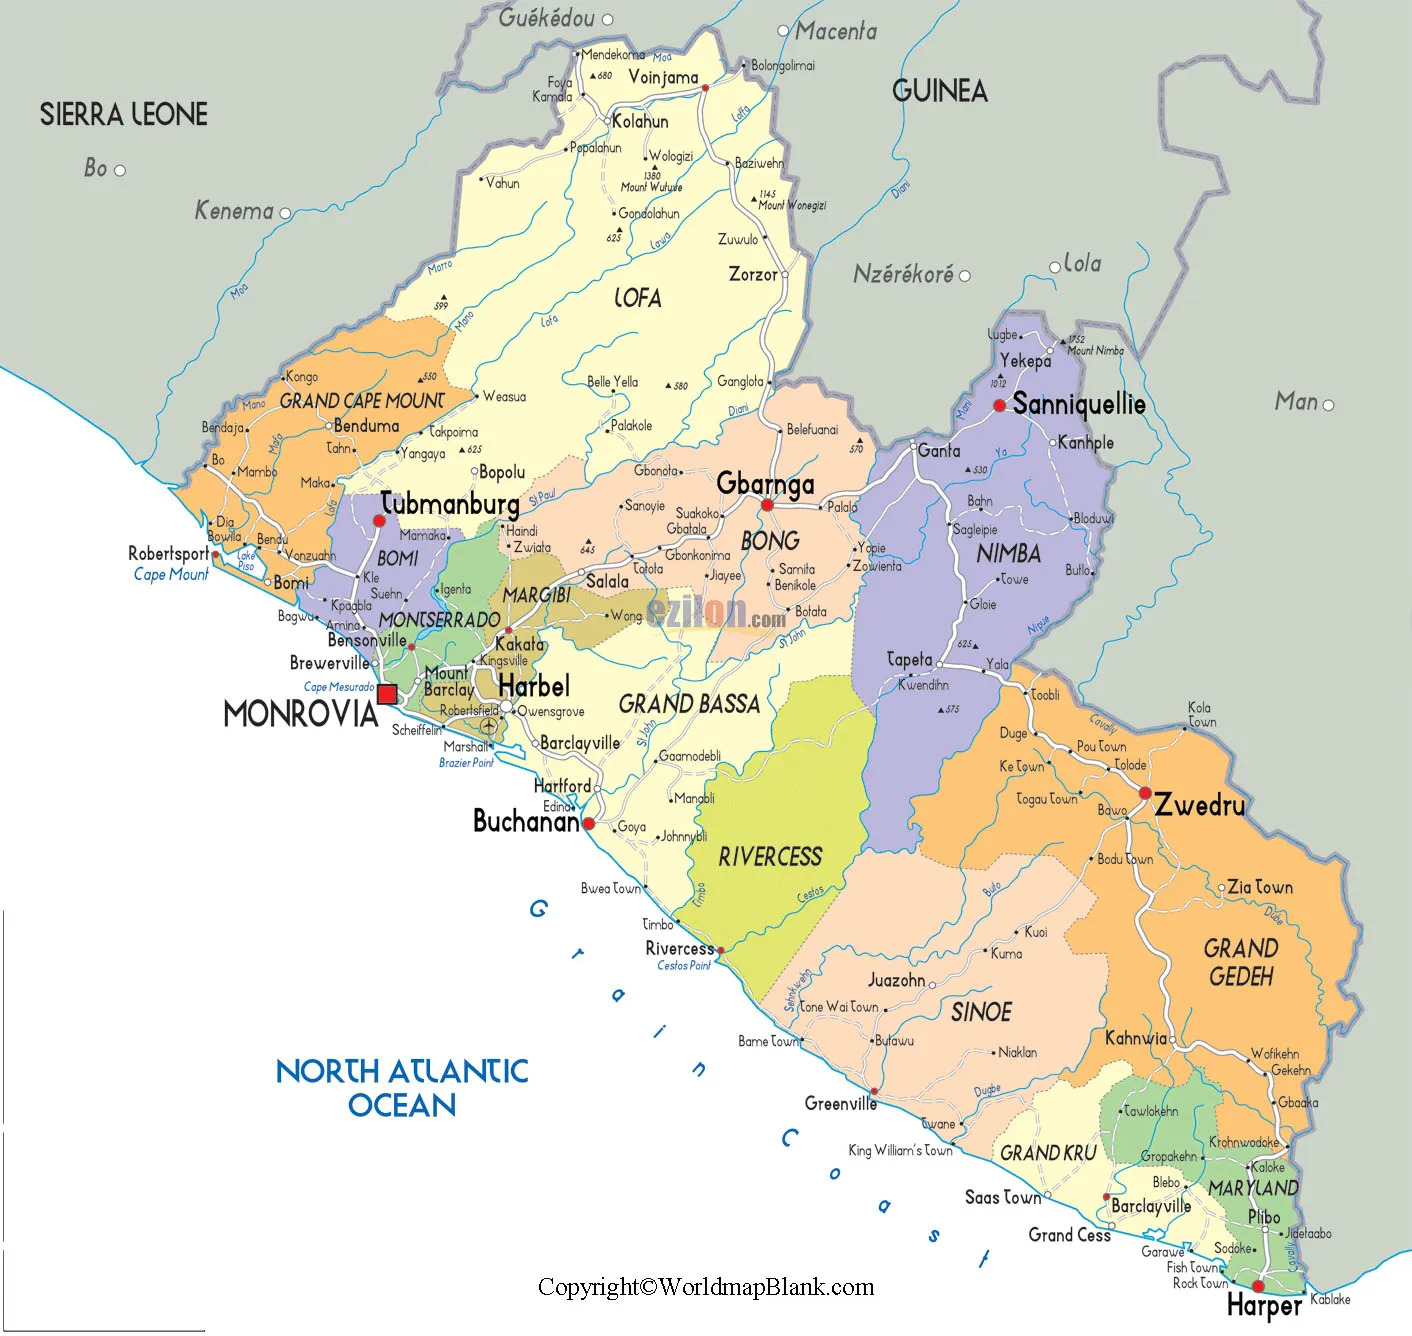 Labeled Liberia with Capital